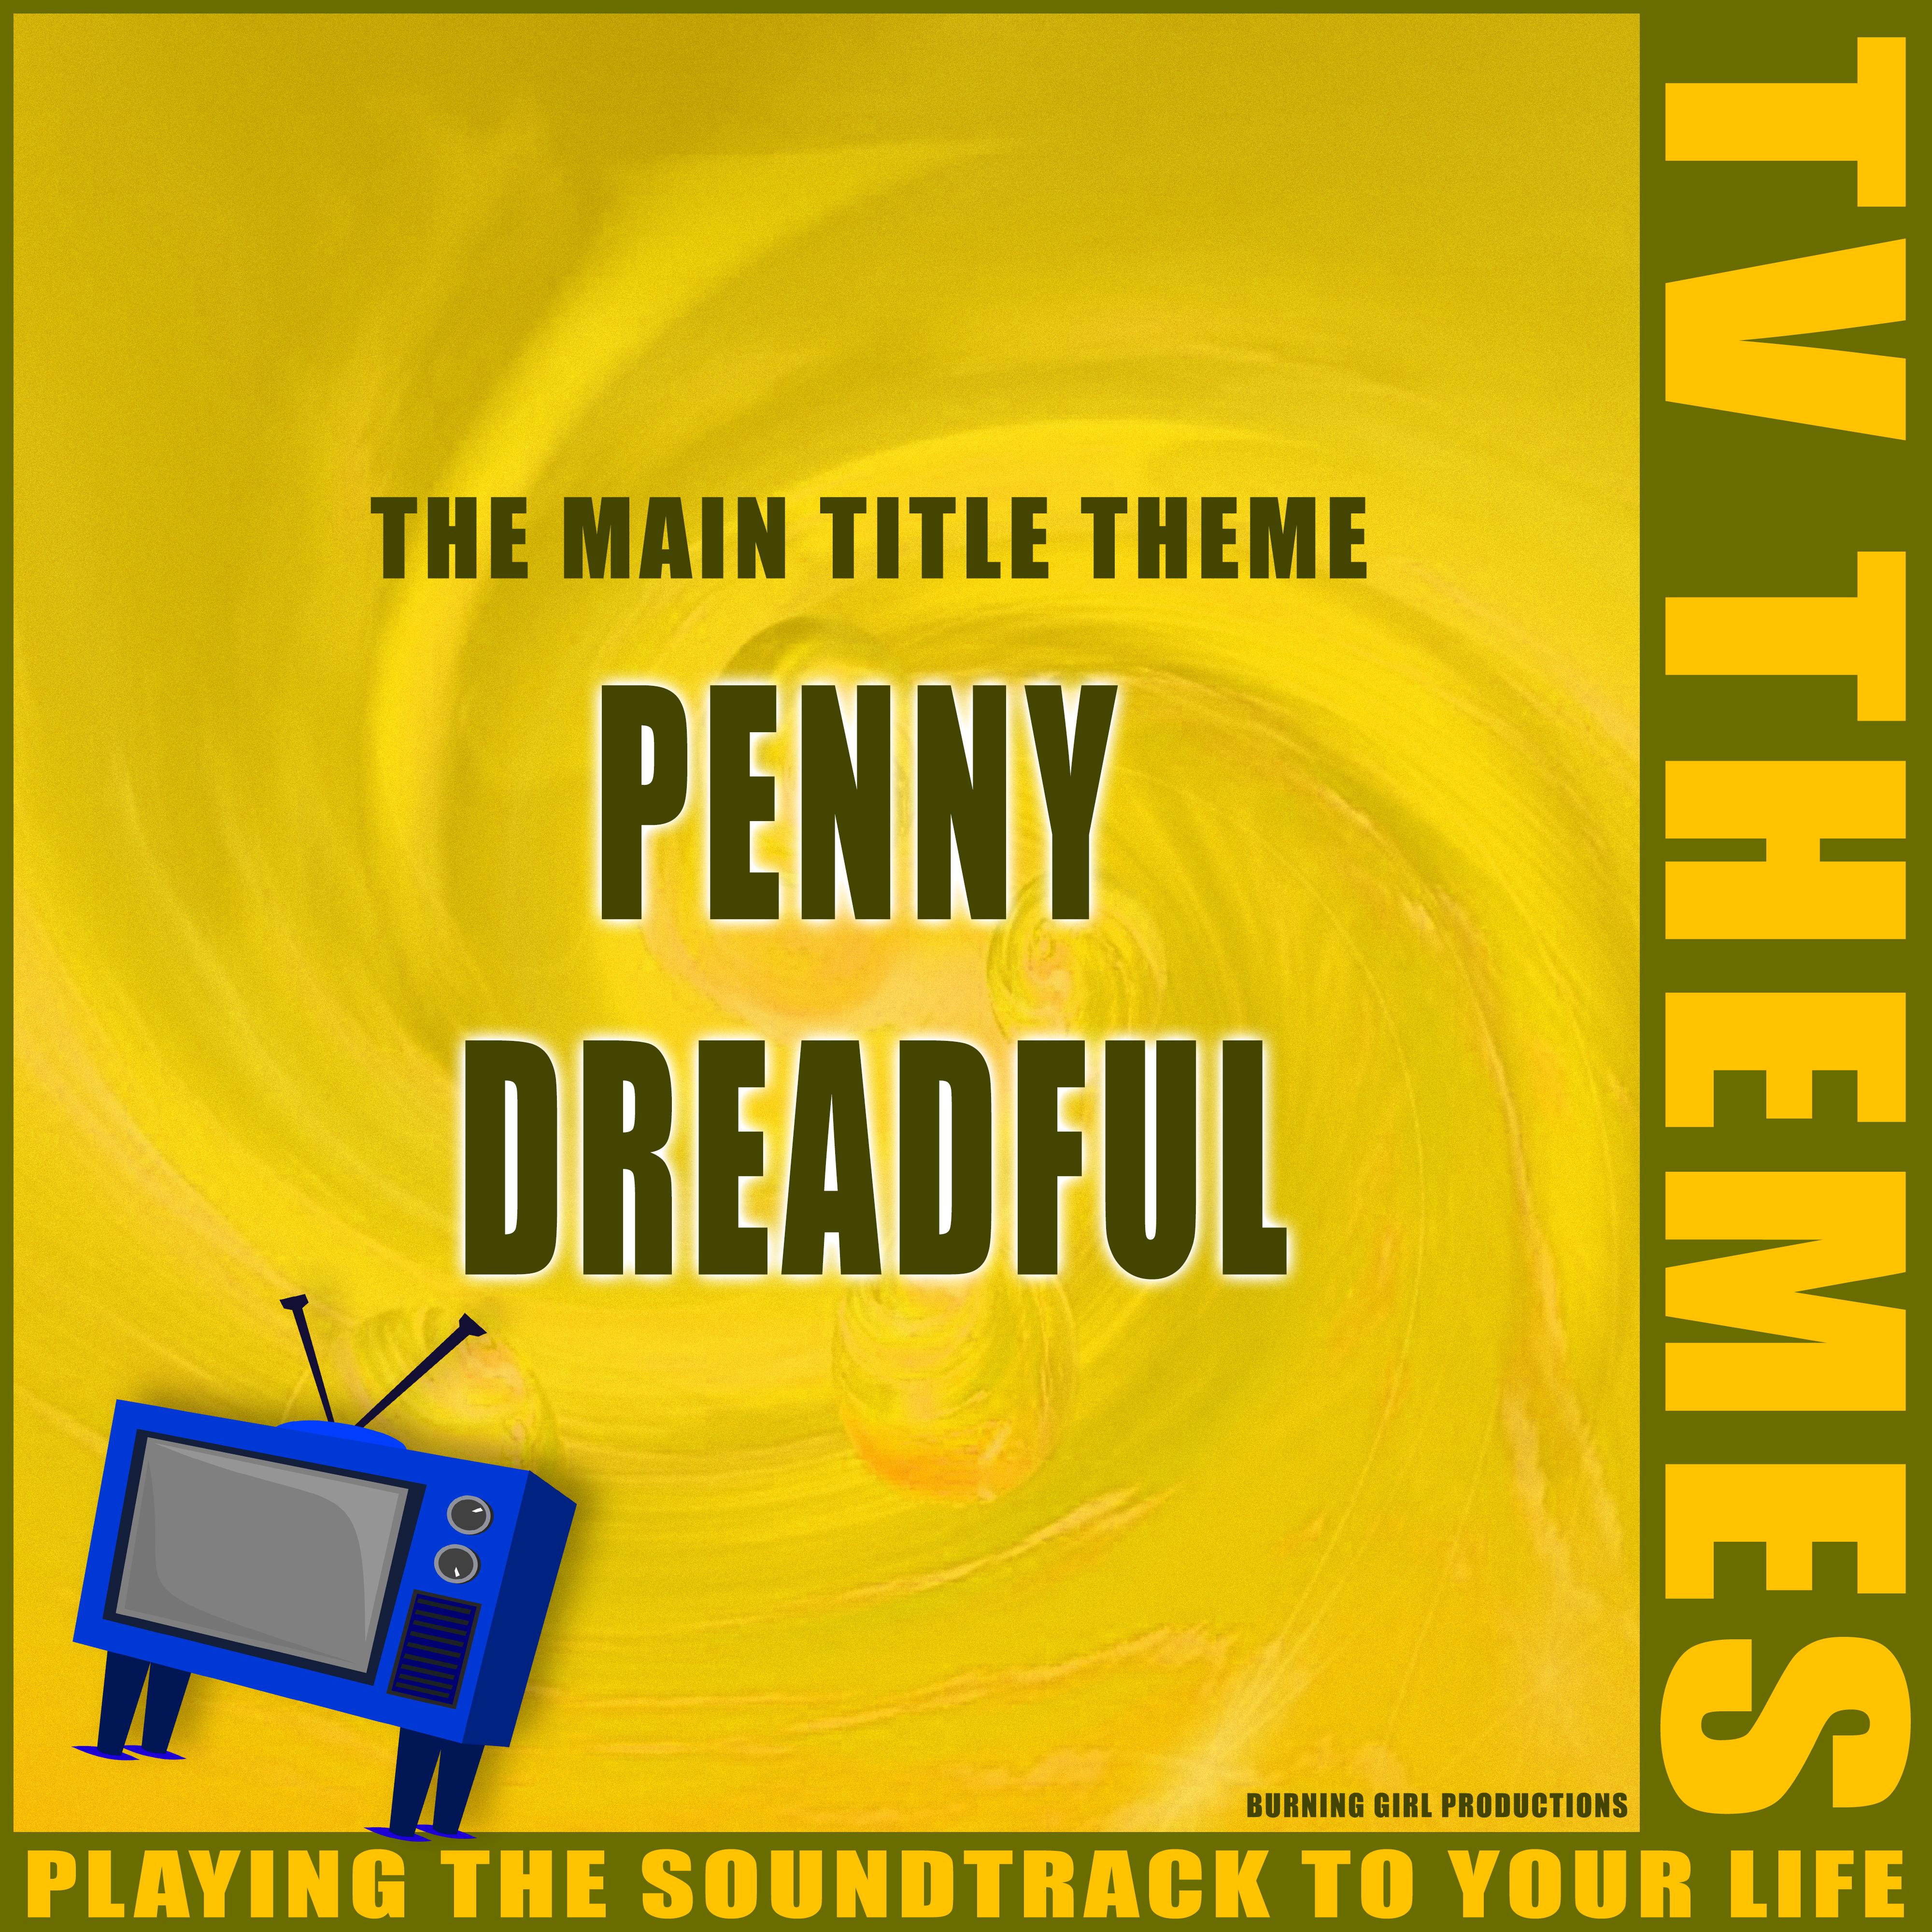 The Main Title Theme - Penny Dreadful